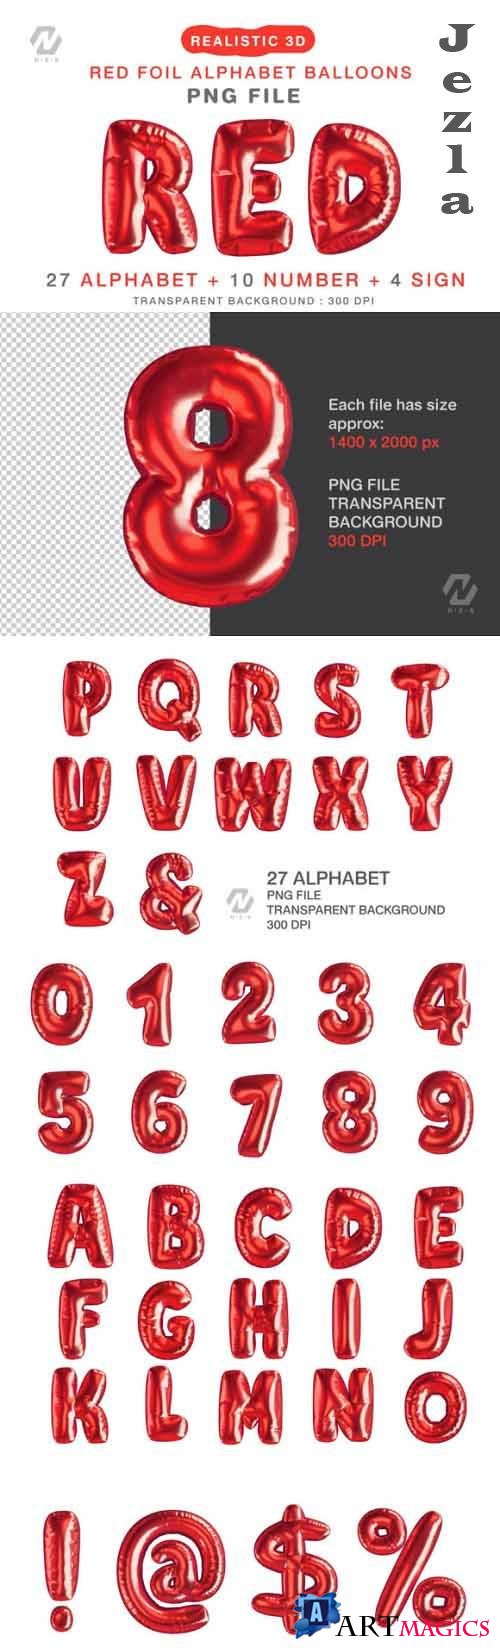 Red Foil Alphabet Balloon Realistic PNG